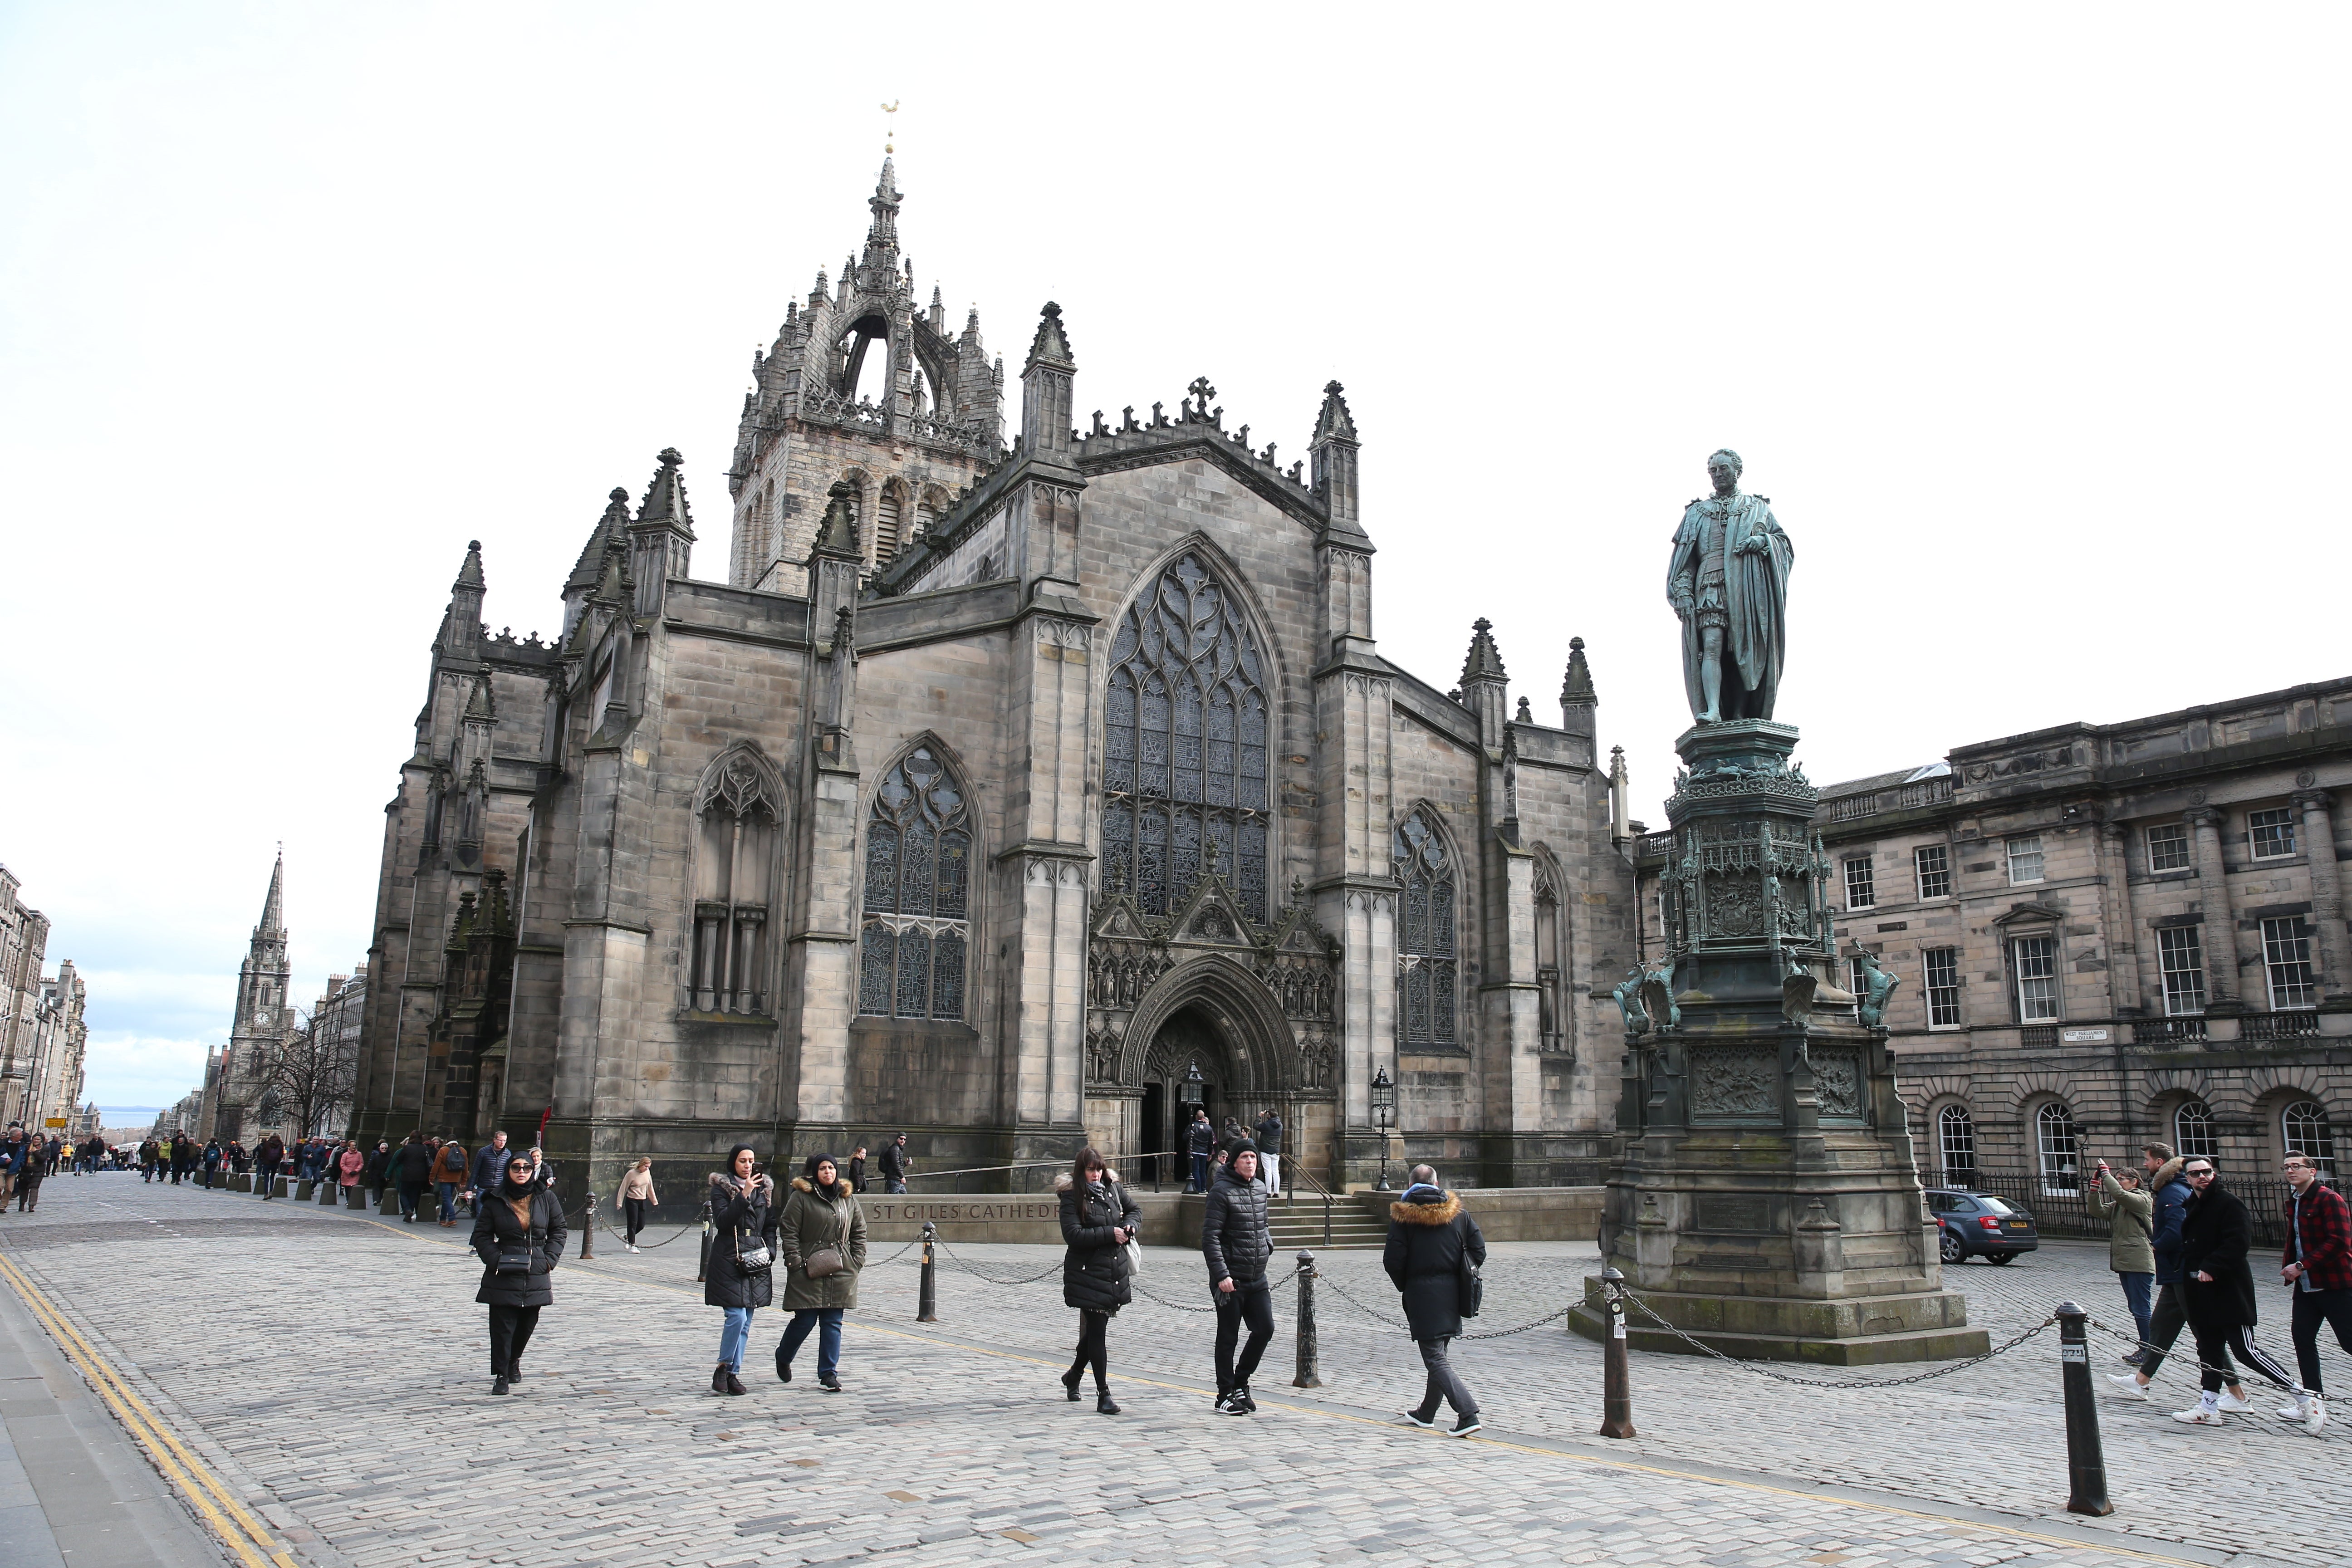 The Queen’s coffin will lie in state at St Giles Cathedral in Edinburgh